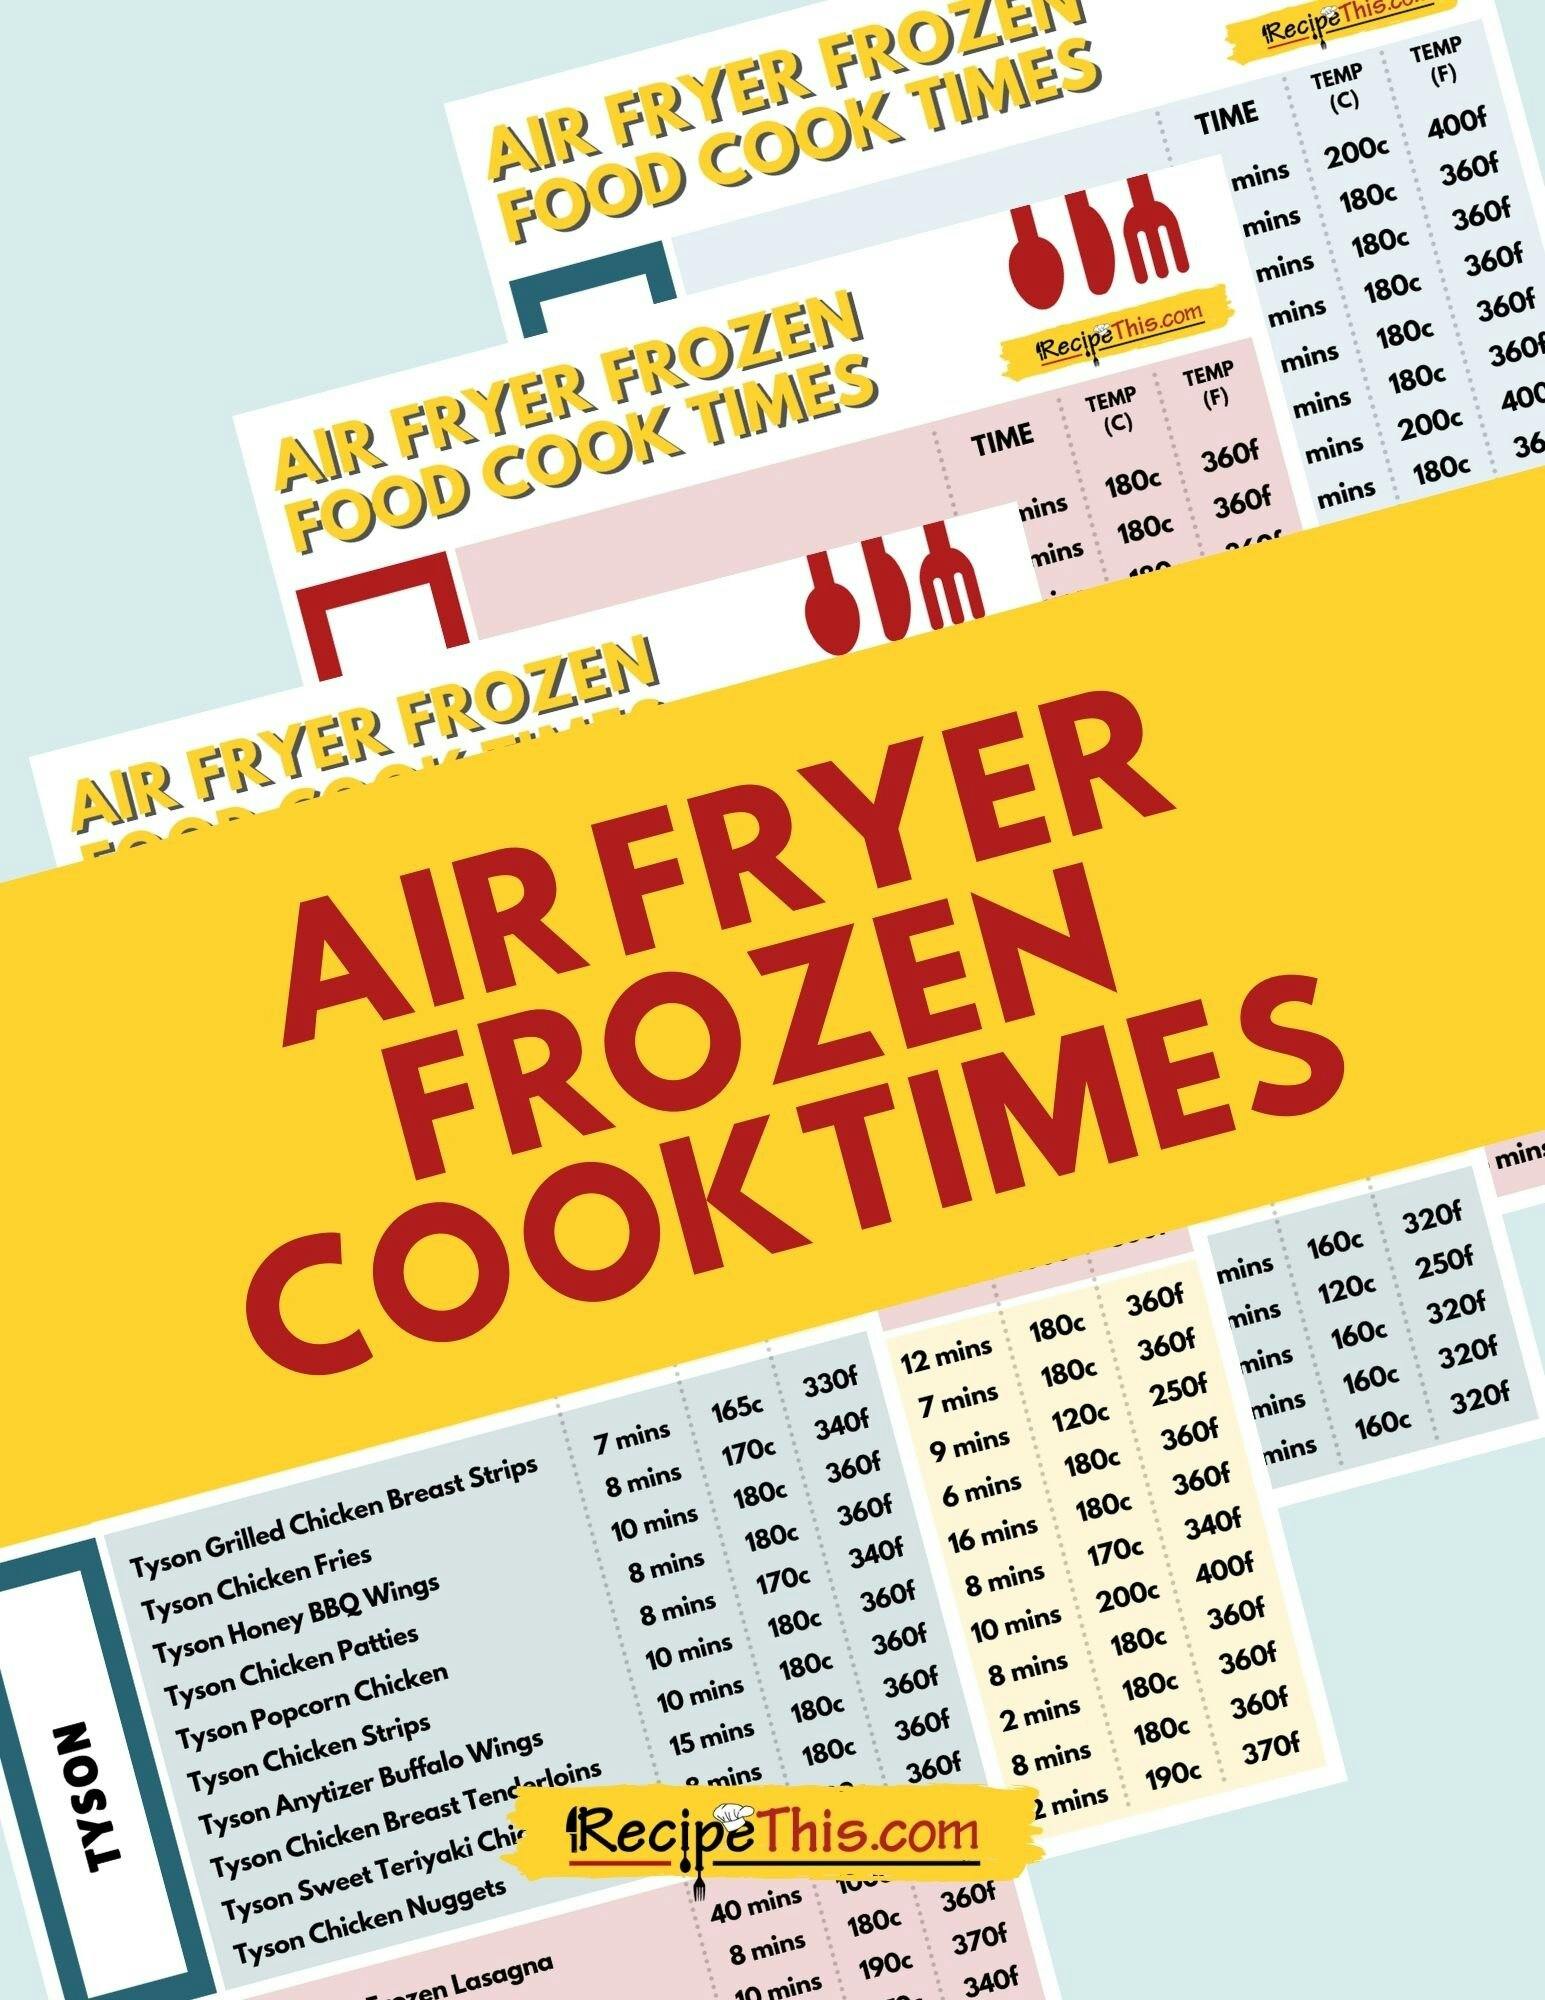 Air Fryer Cooking Times Chart - 5 Free Printables